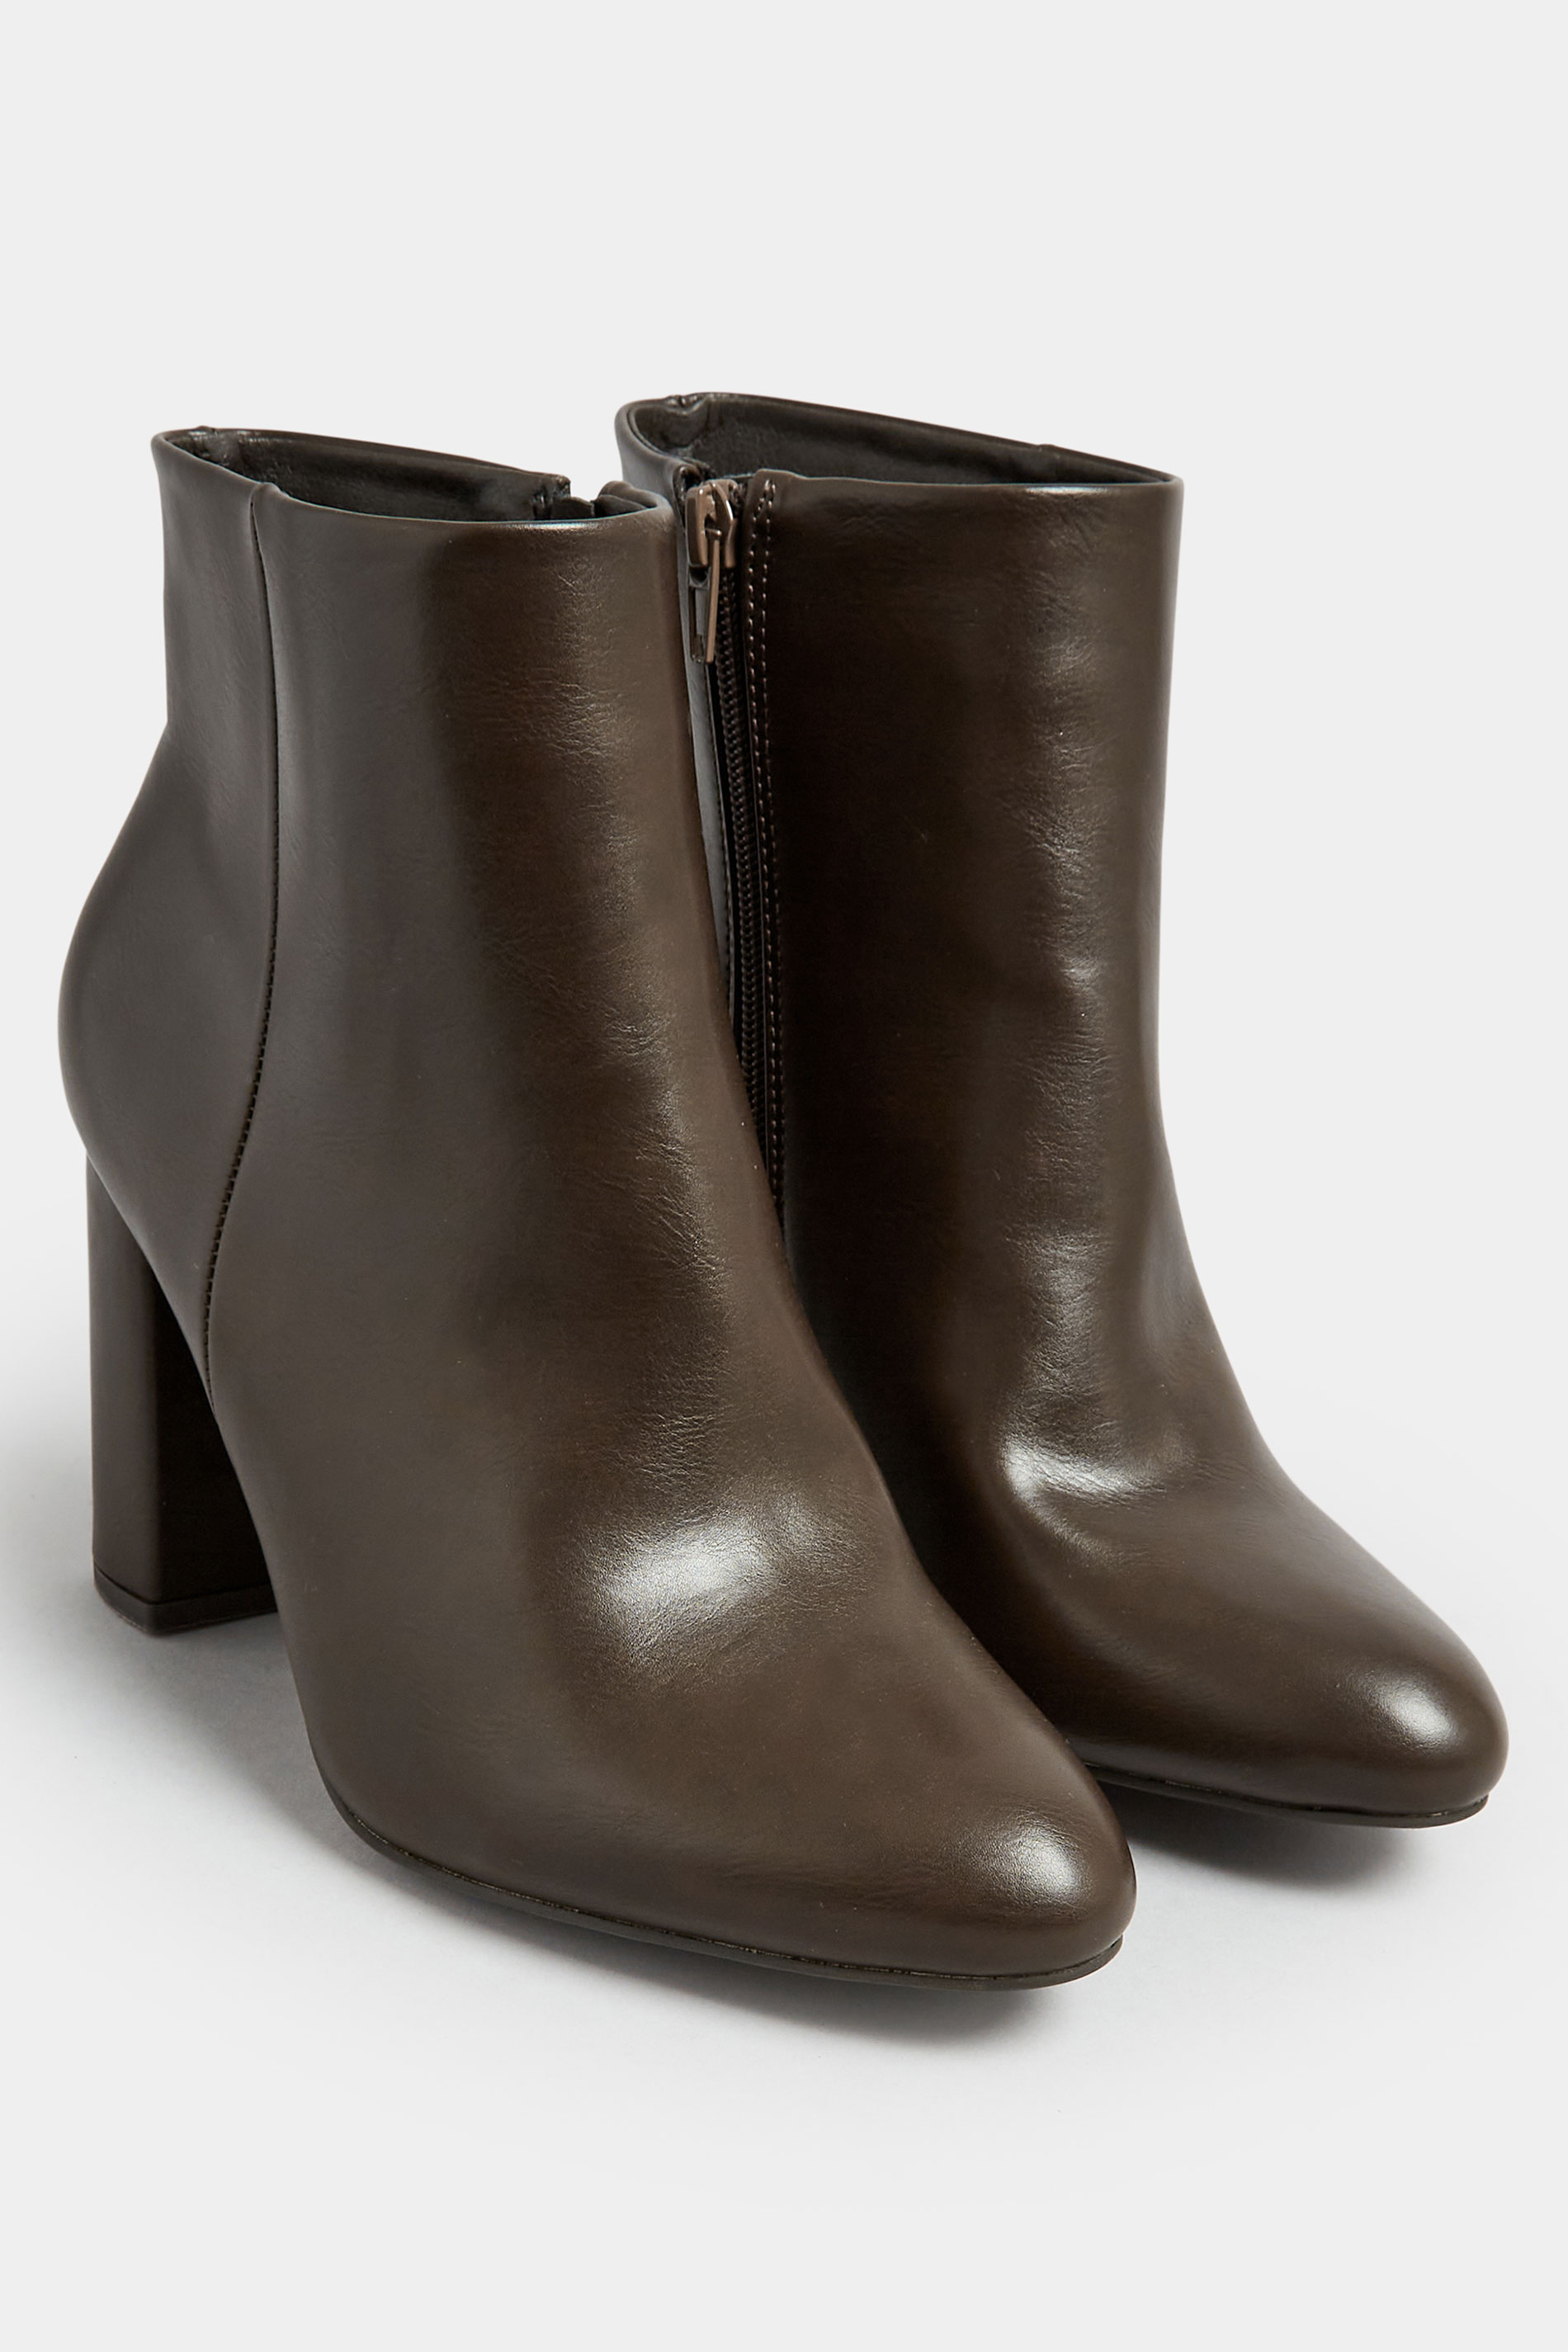 LIMITED COLLECTION Brown Heeled Ankle Boots In Extra Wide EEE Fit | Yours Clothing  2